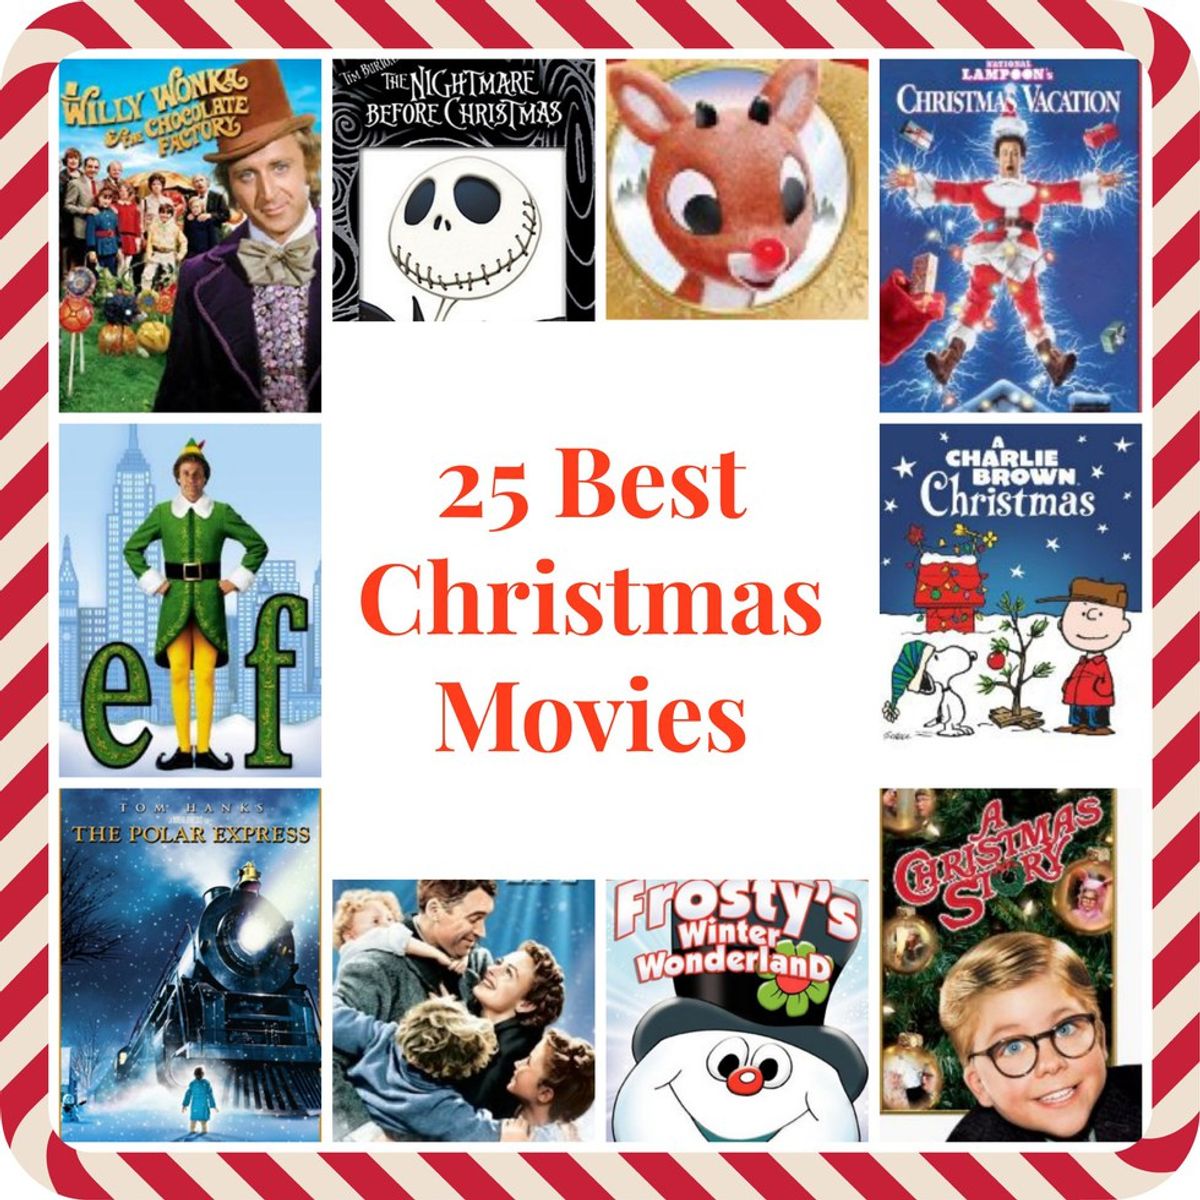 25 Movies to Watch During The Holiday Season